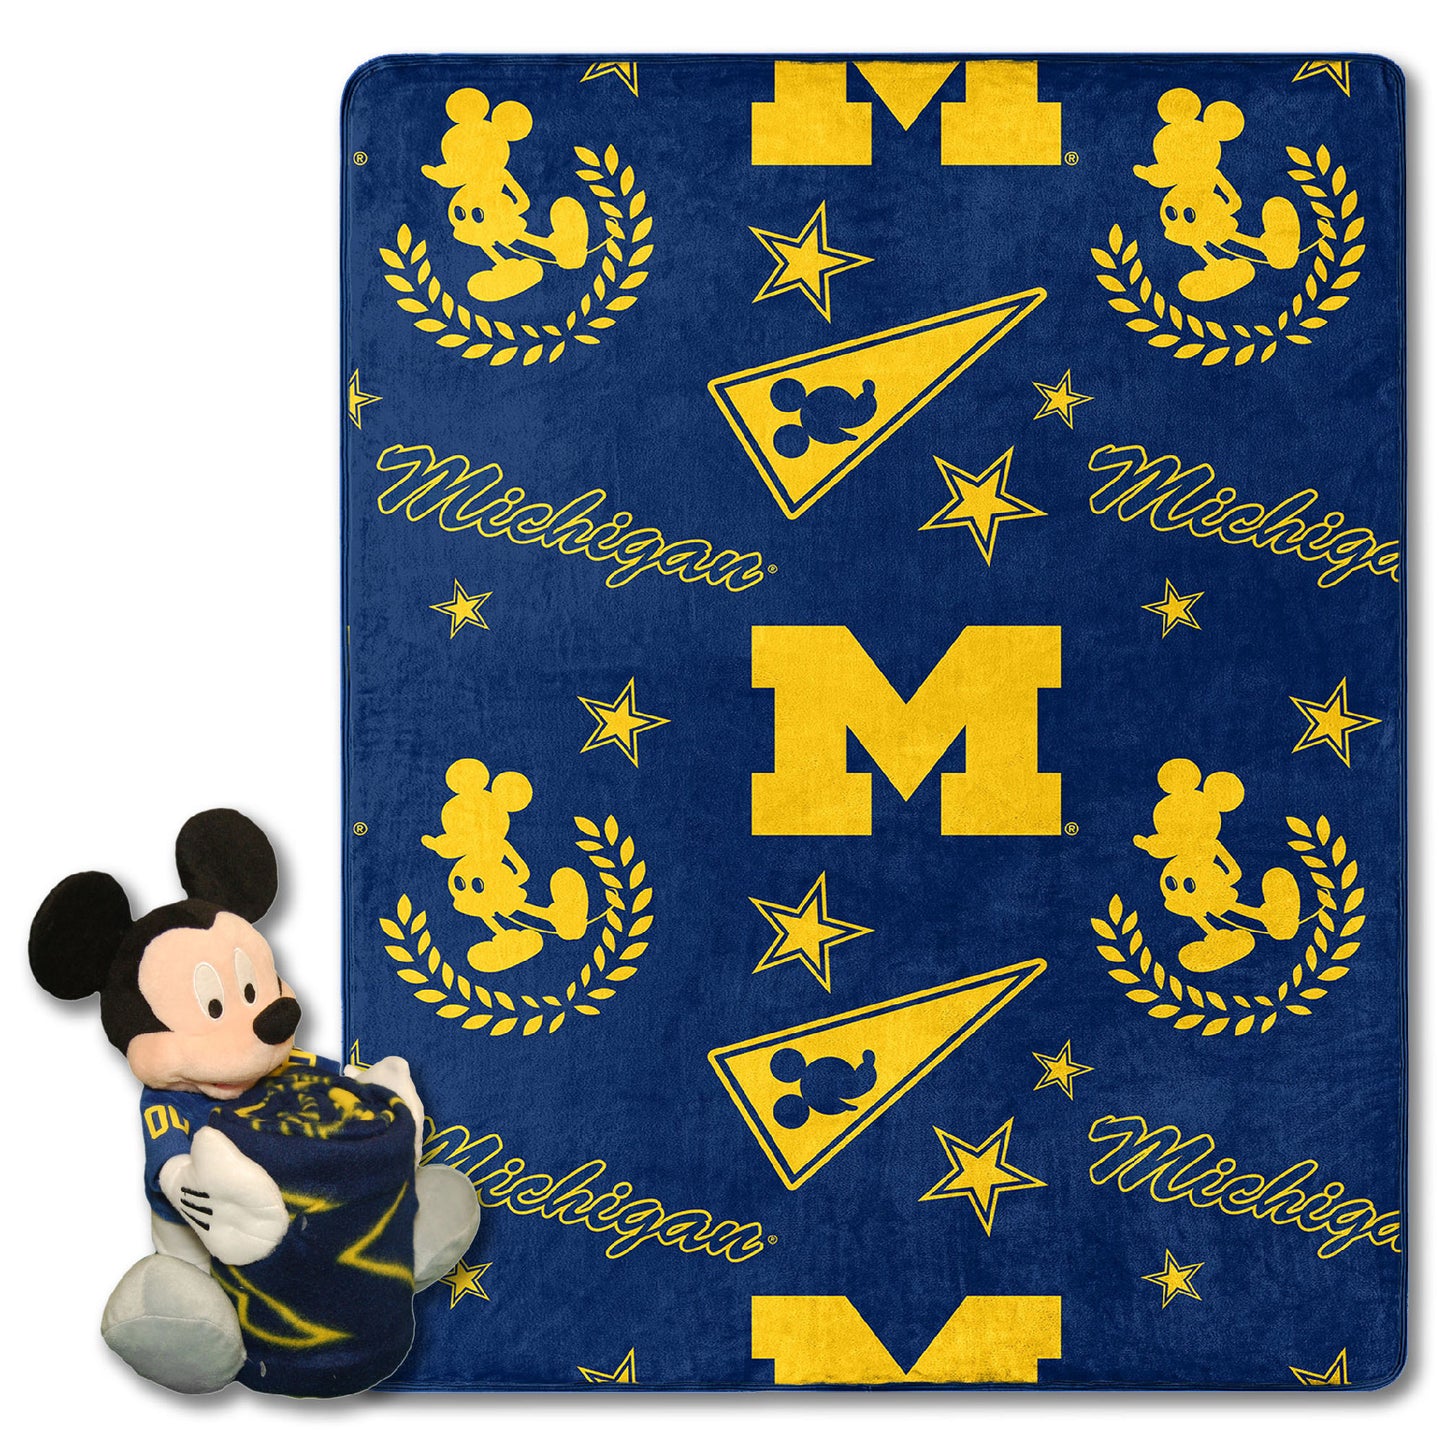 Michigan OFFICIAL NCAA & Disney's Mickey Mouse Character Hugger Pillow & Silk Touch Throw Set